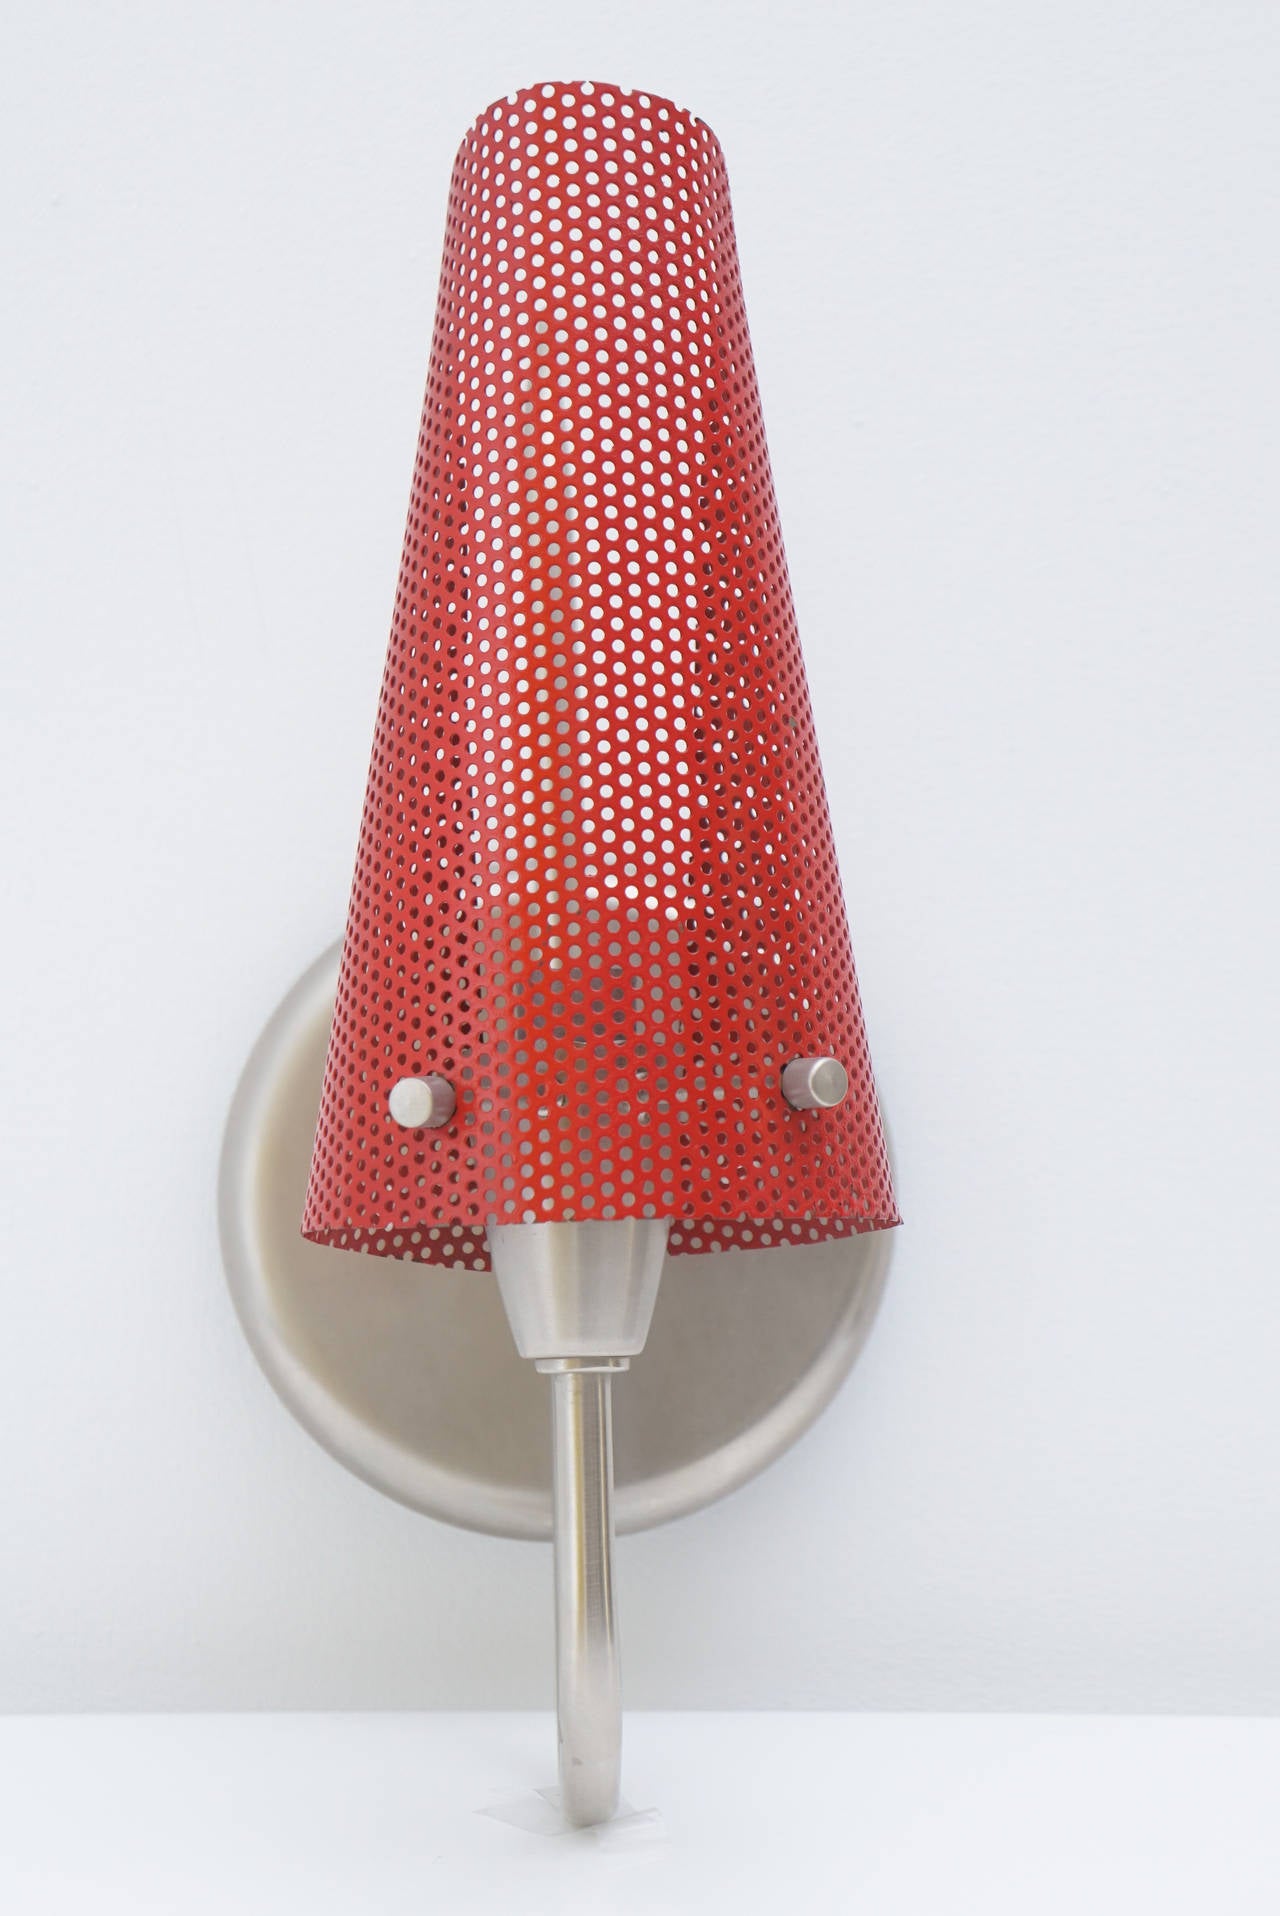 Mid-Century Modern Vintage Perforated Red Wall Sconce For Sale